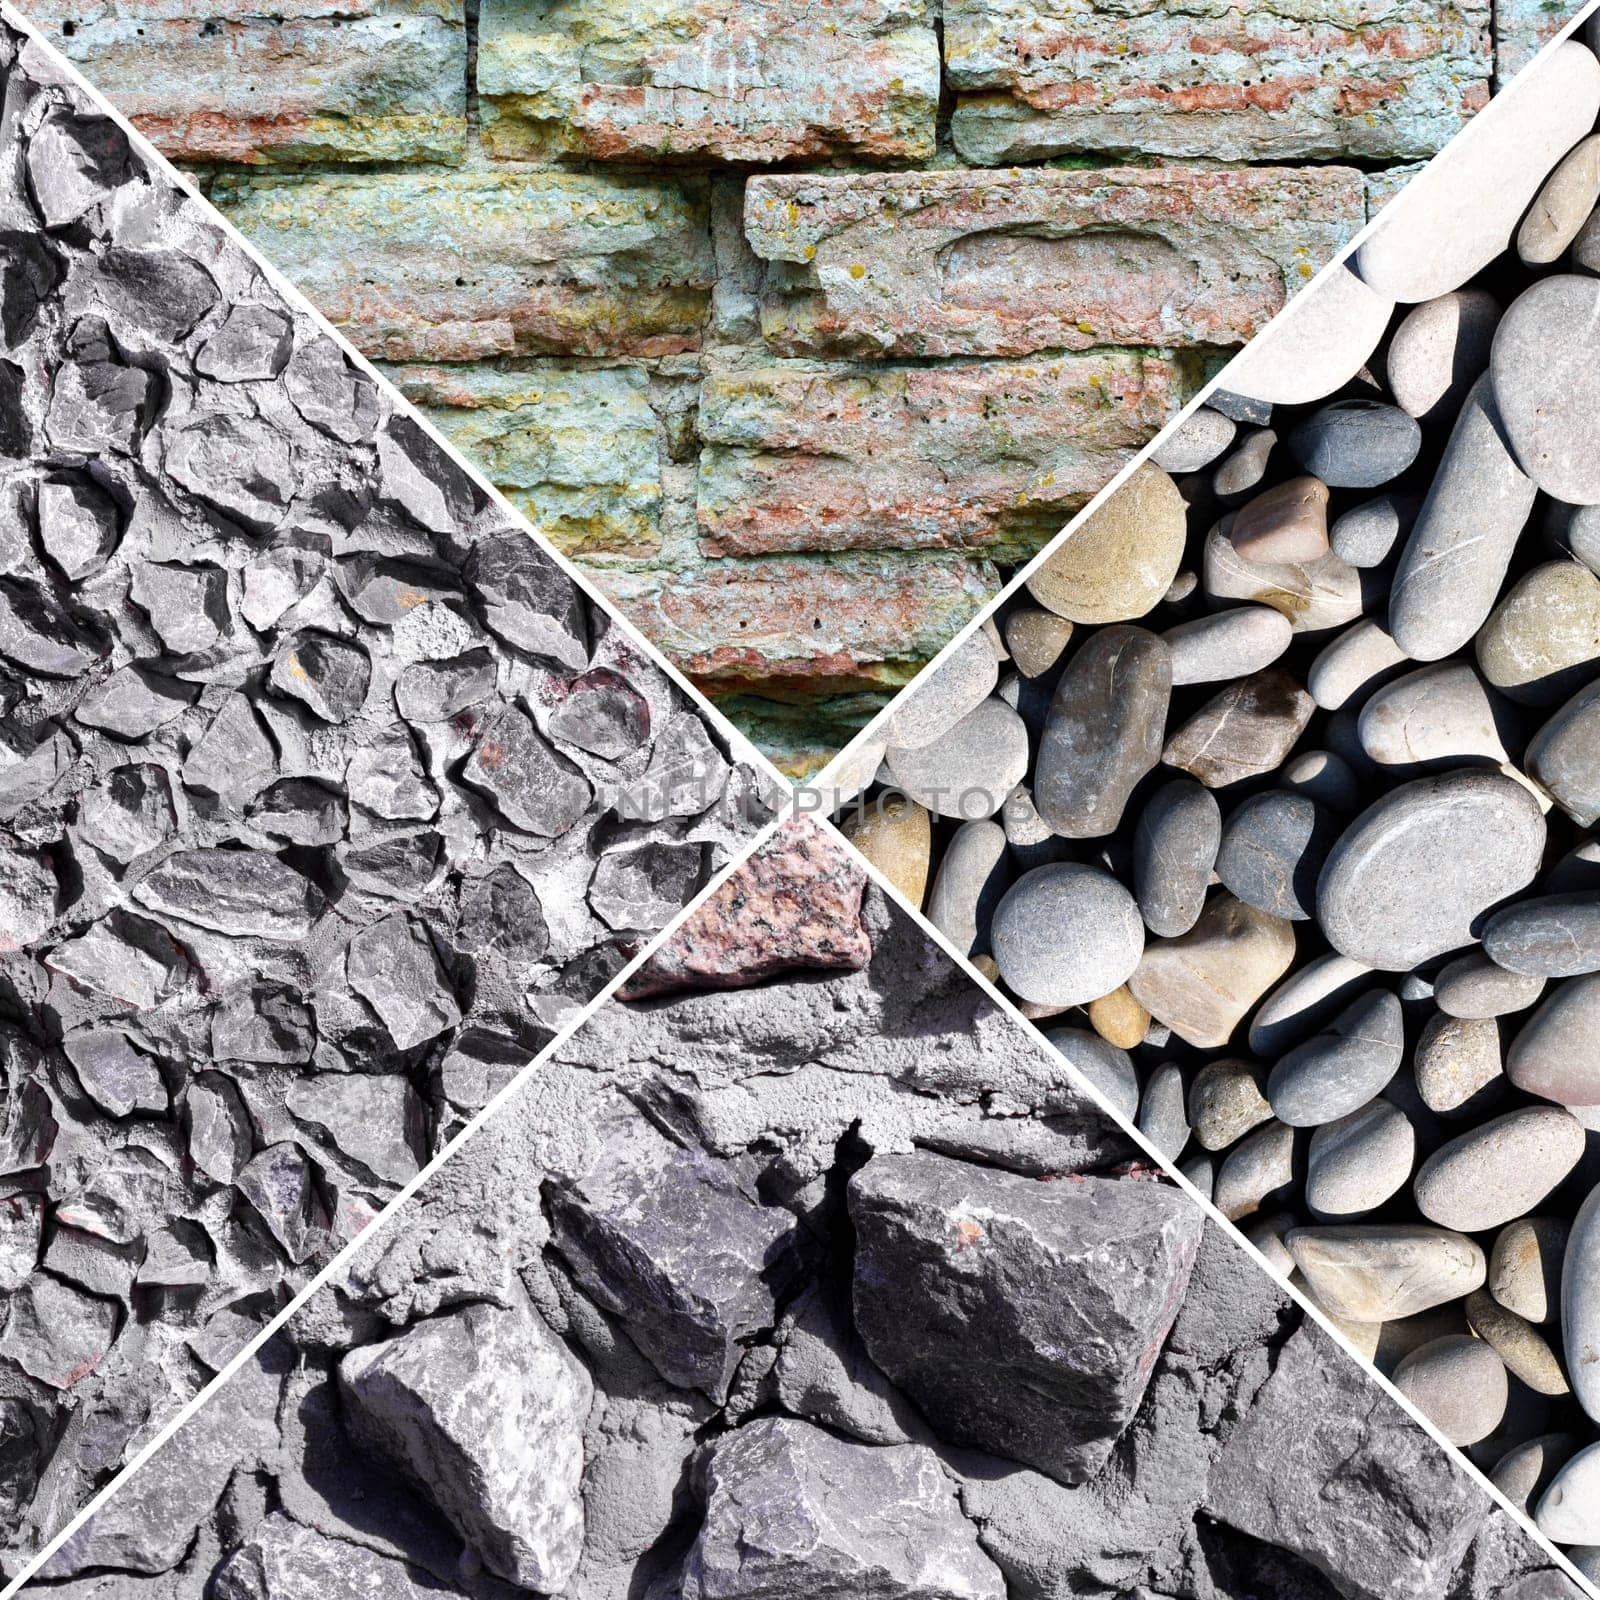 Stone wall with different stones. Texture, various natural stones, collage